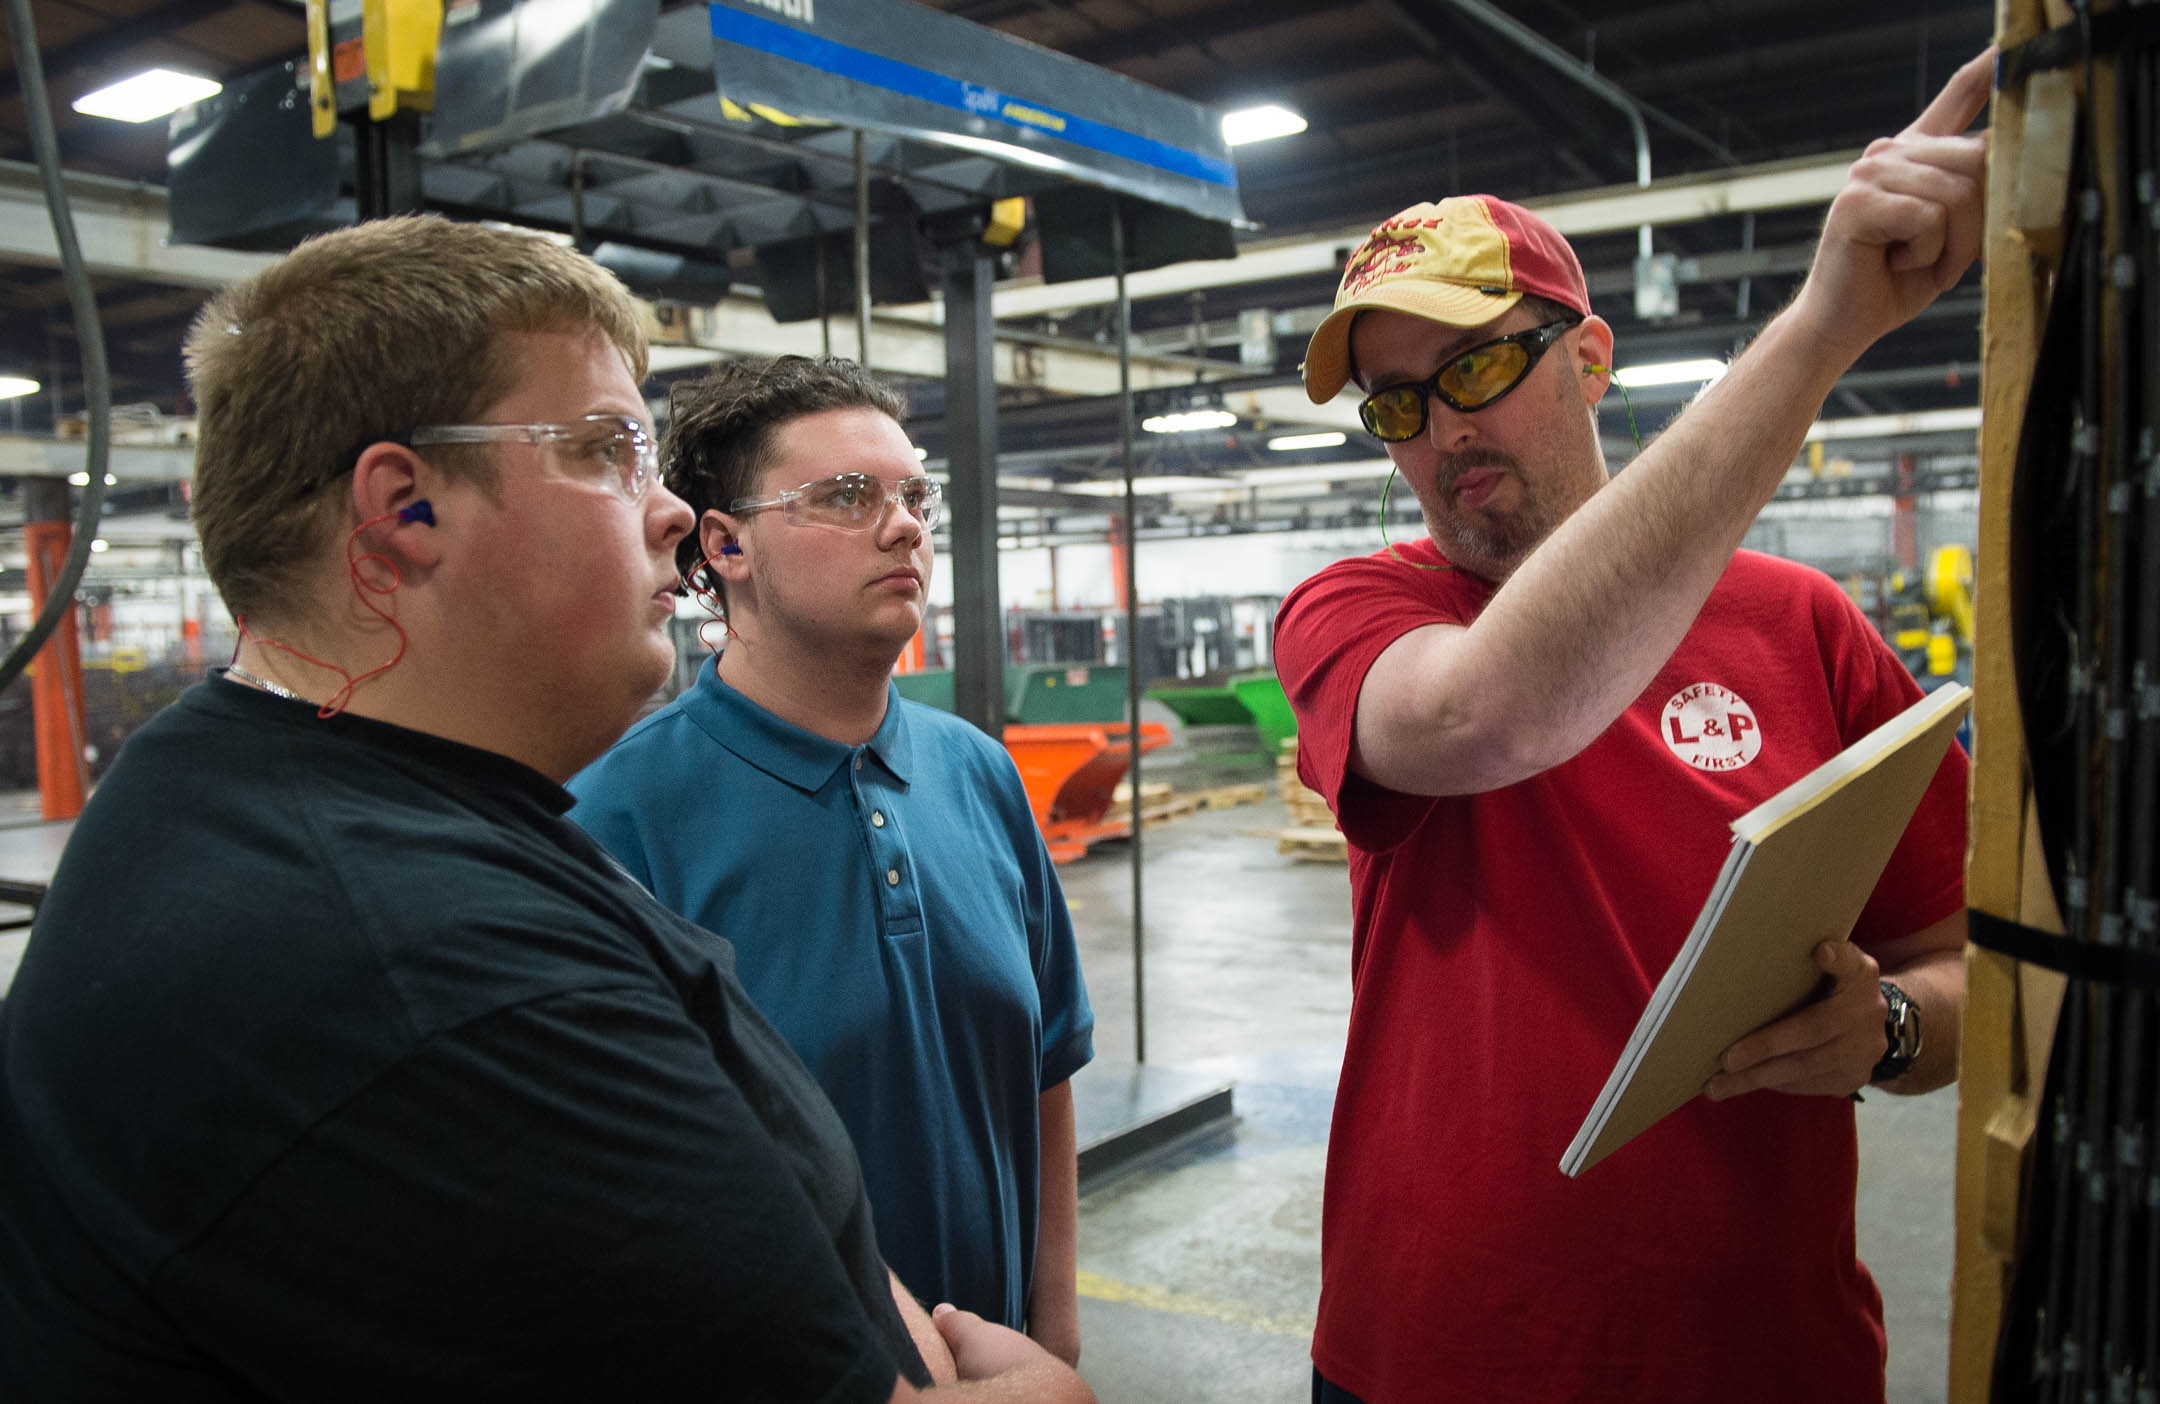 Jeff Fletcher, right, a quality technician at Leggett & Platt's Winchester facility, shows Clark County Area Technology Center students Brett Foley and Garrett Samuels what to look for while doing a quality inspection. Photo by Bobby Ellis, Oct. 25, 2016